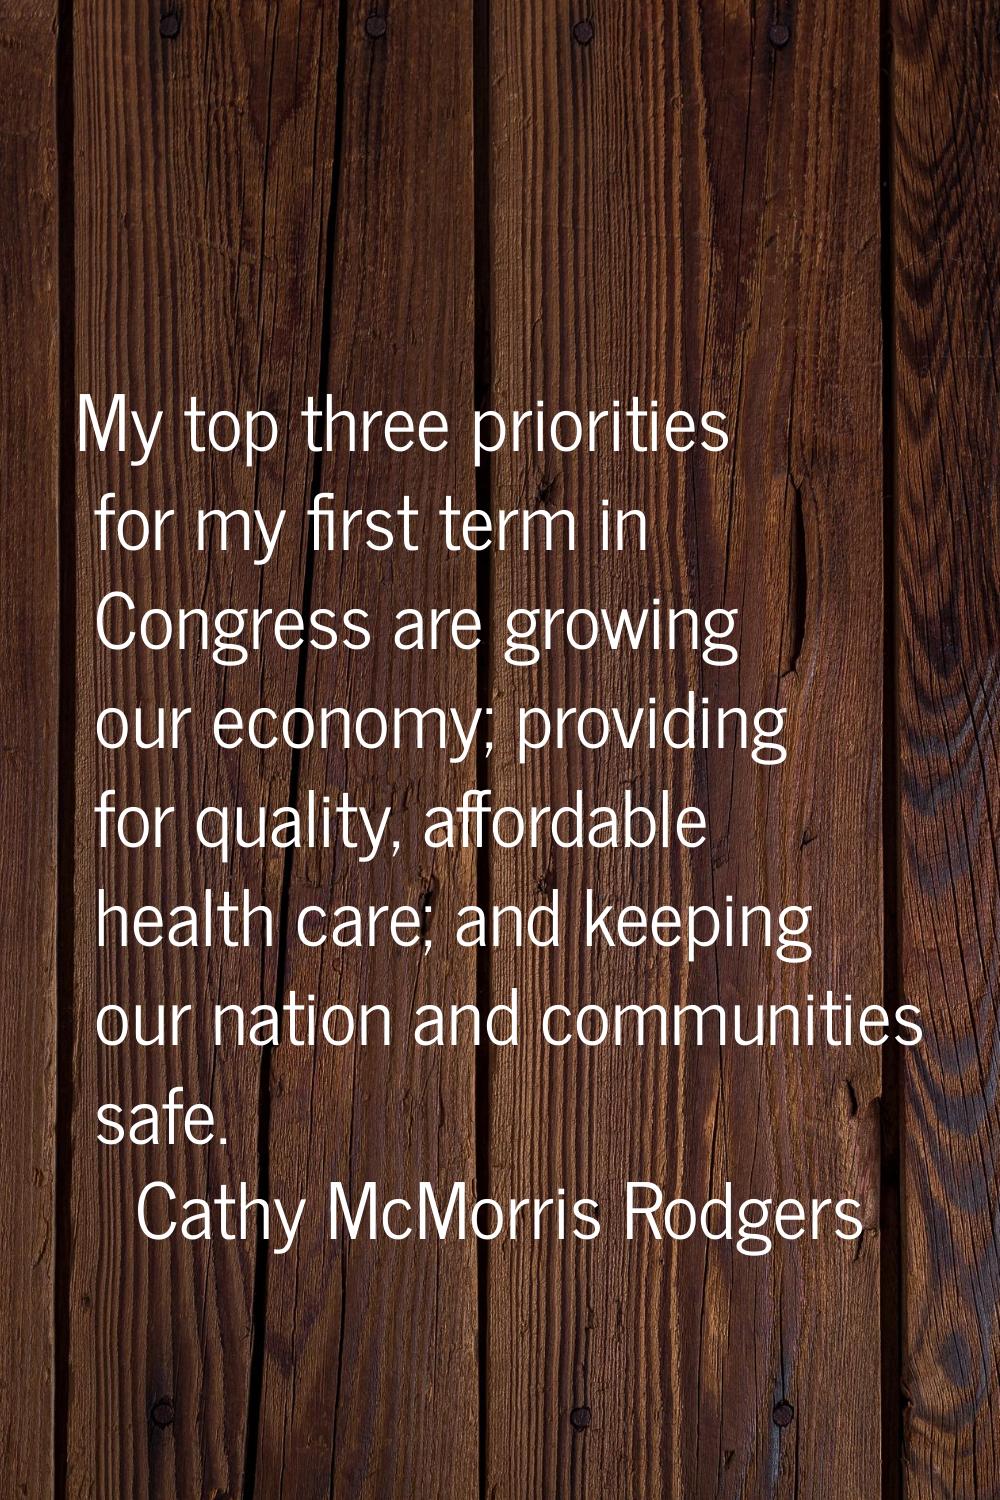 My top three priorities for my first term in Congress are growing our economy; providing for qualit